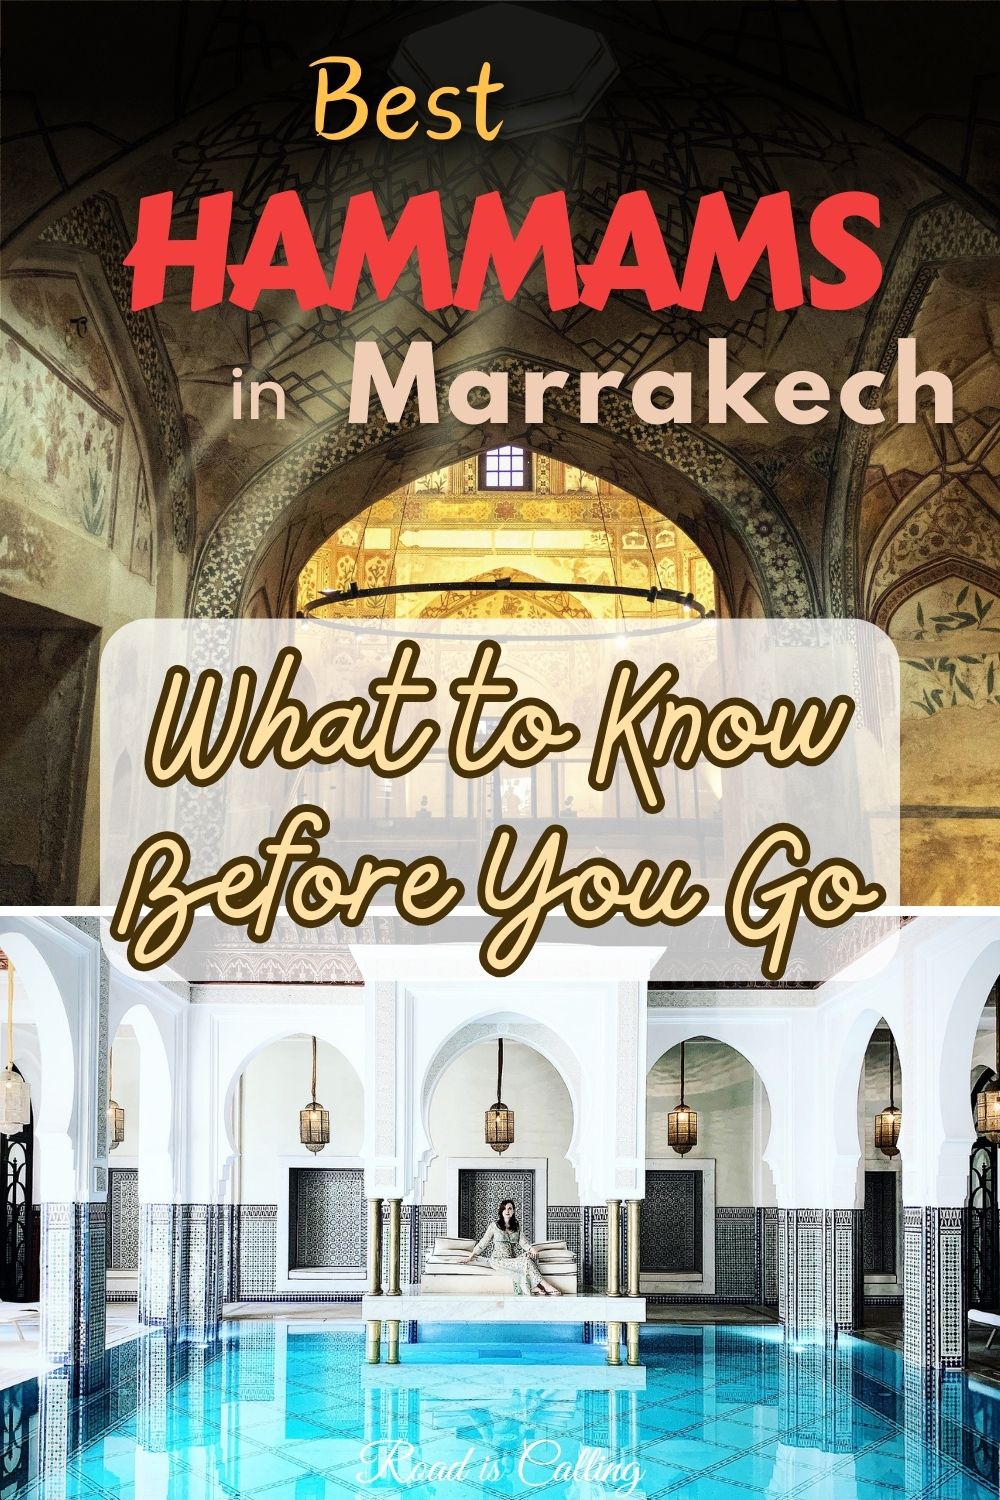 Best hammams in Marrakech based on my own experience after visiting some spas and getting recommendations from local hosts!